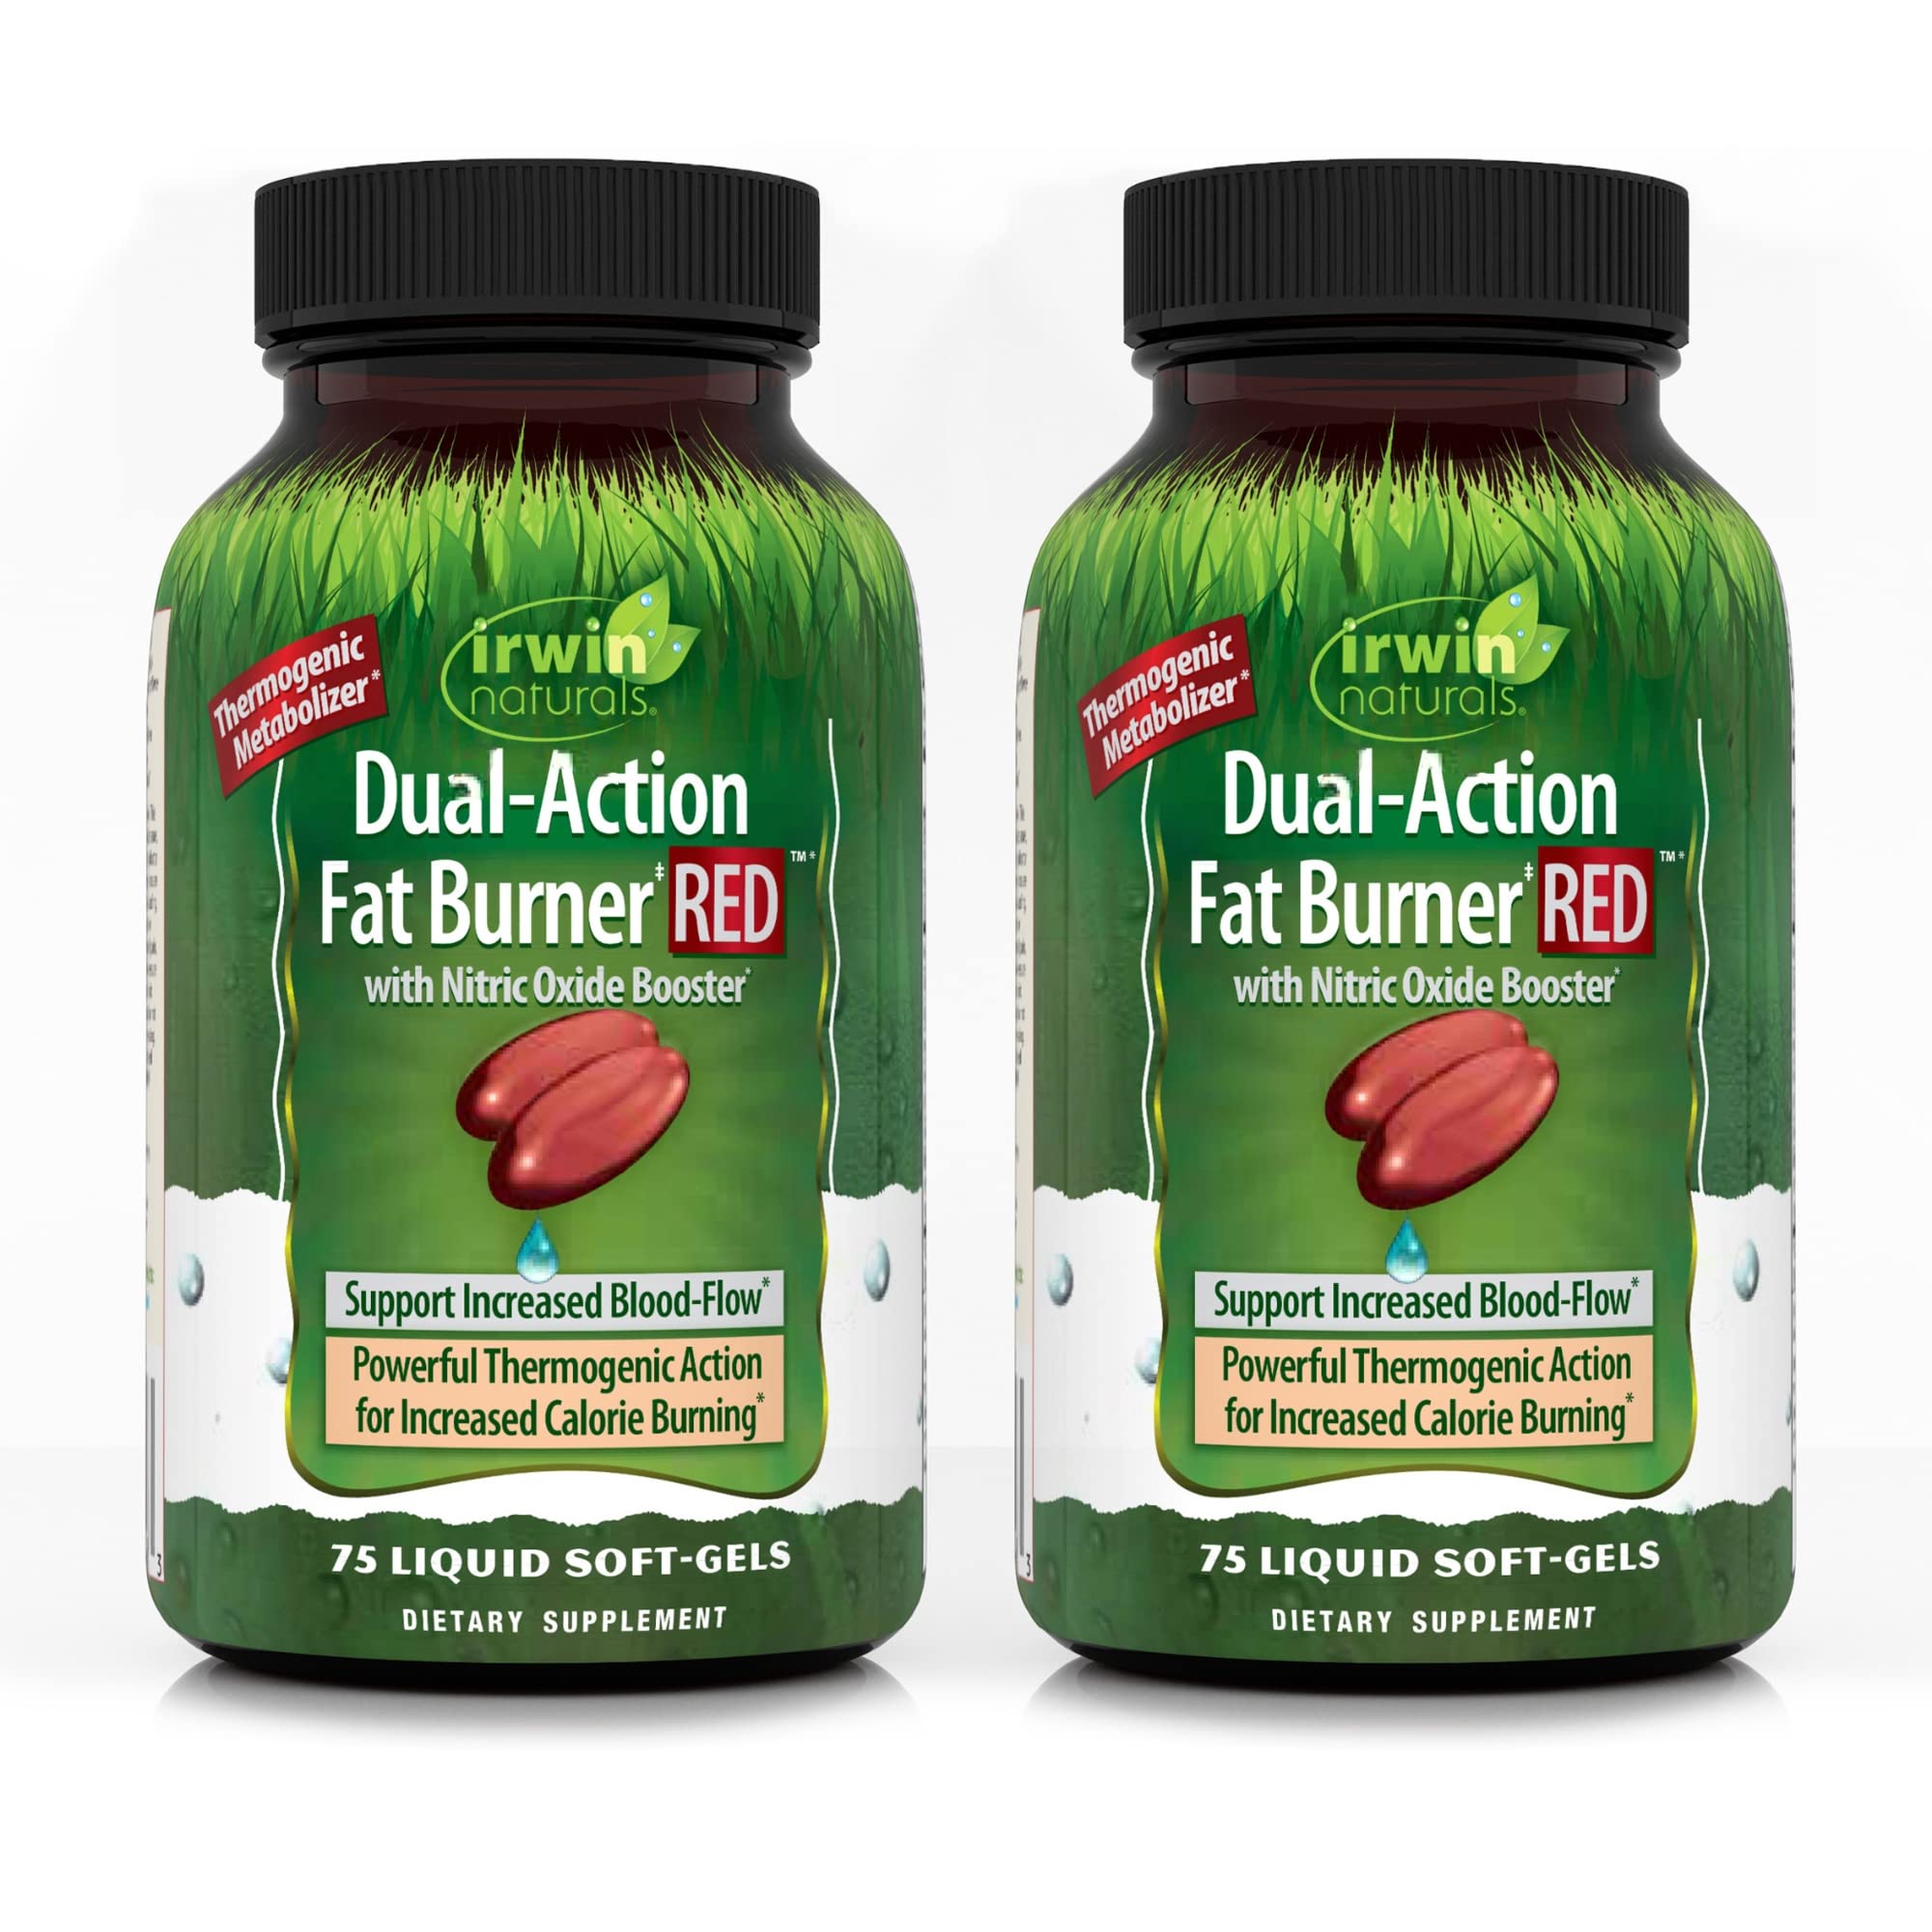 Irwin Naturals Dual-Action Fat Burner RED - 75 Liquid Soft-Gels, Pack of 2 - Powerful Thermogenic with Nitric Oxide Booster - 50 Total Servings